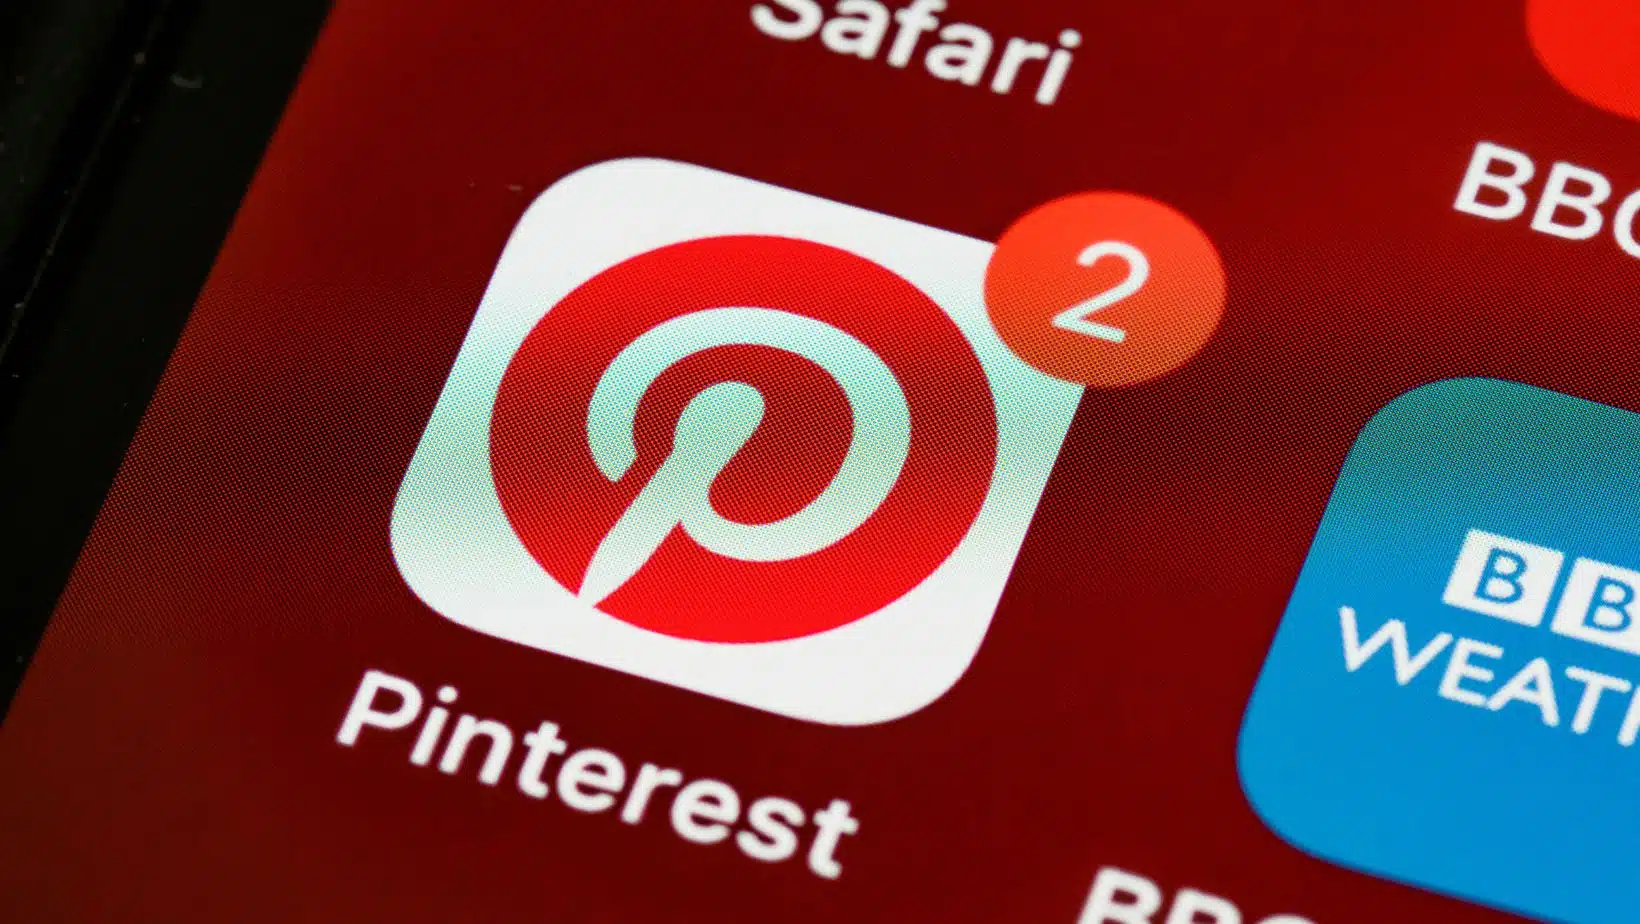 Benefits of Pinterest for Business